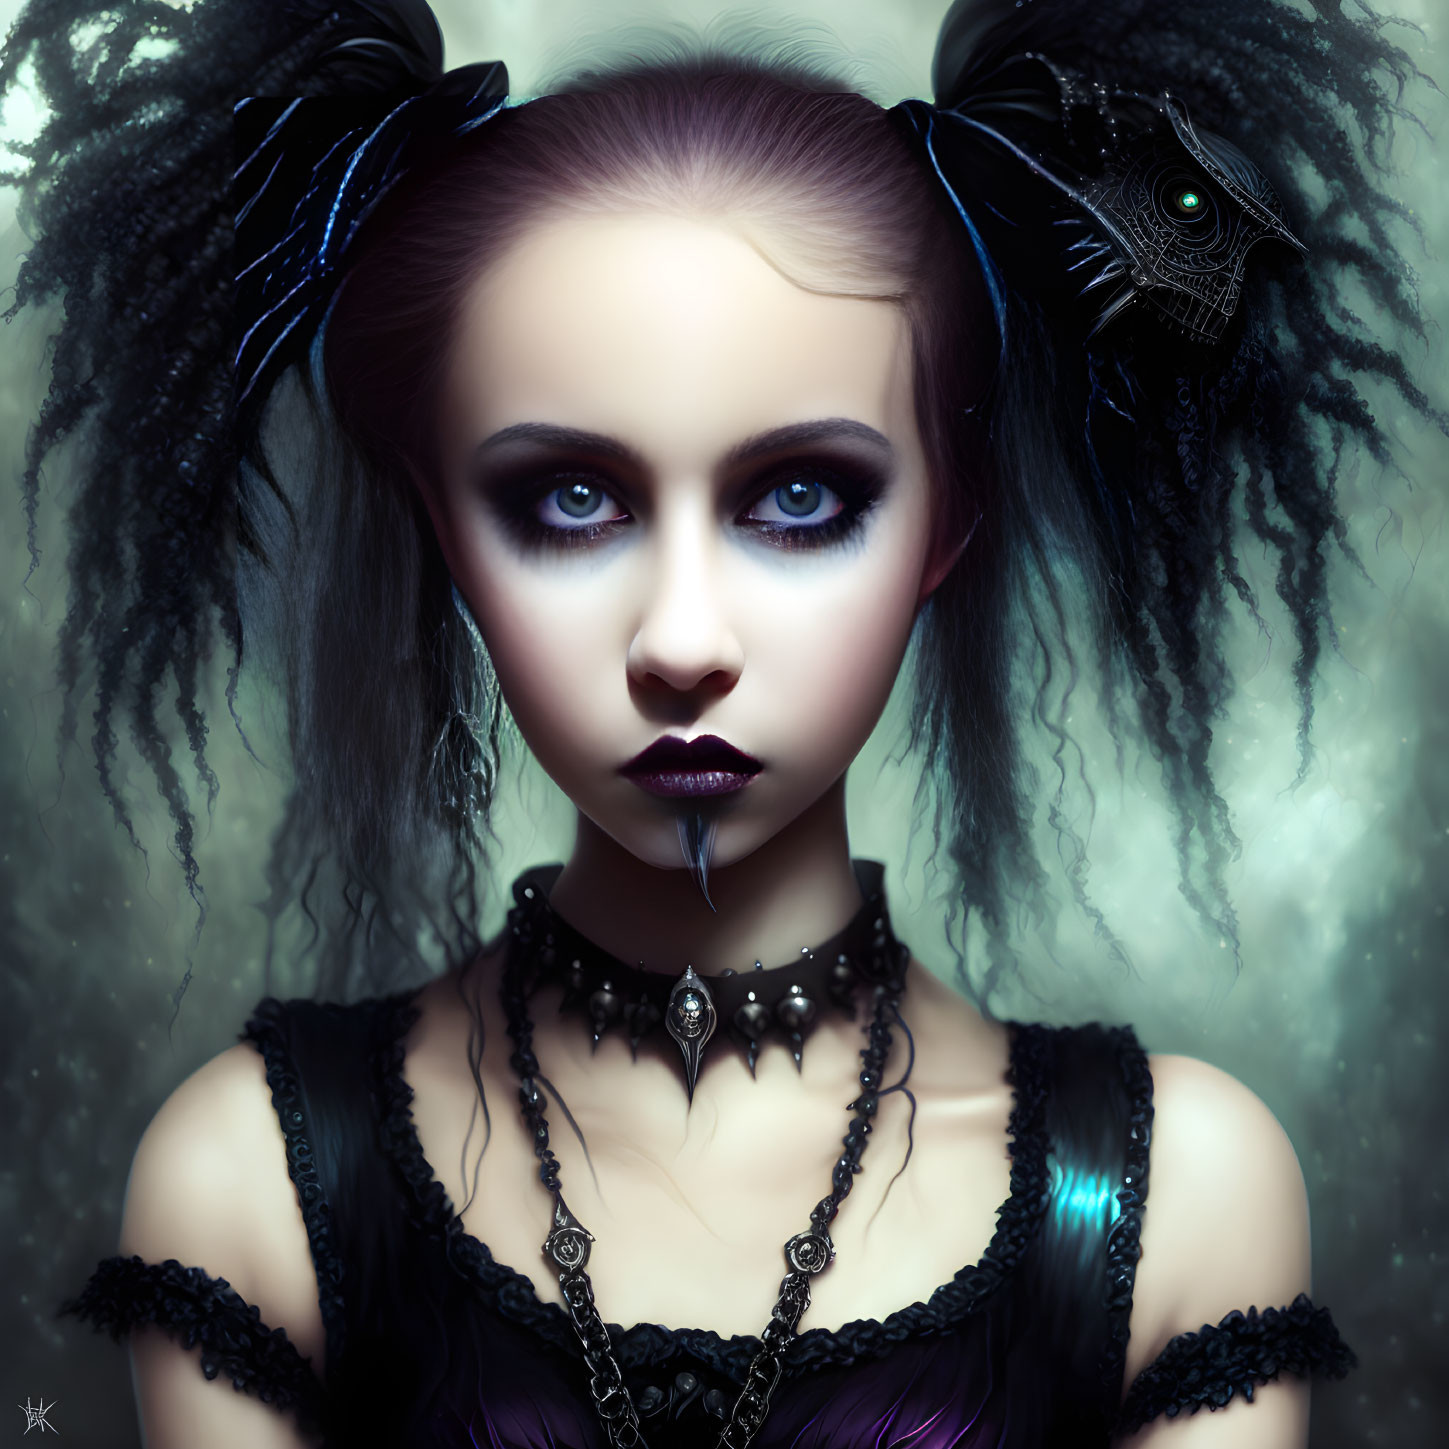 Gothic female portrait with blue eyes, dark lipstick, and lace attire